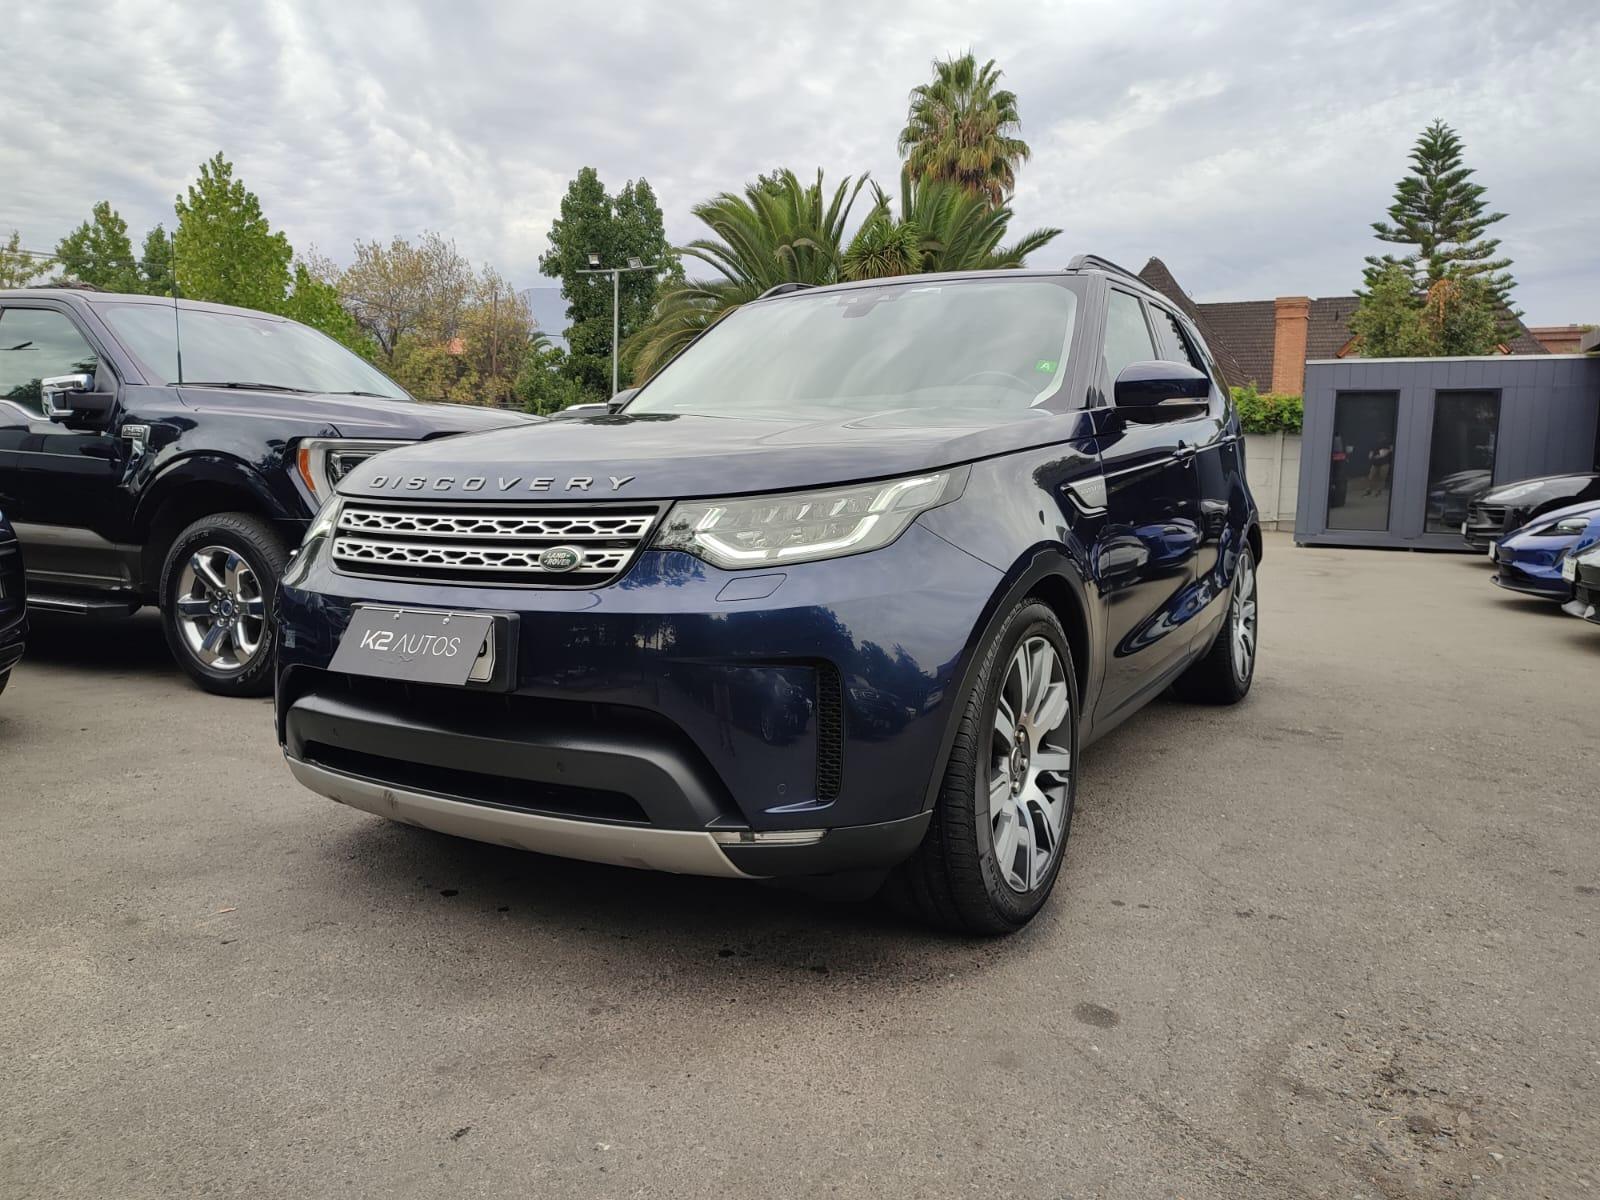 LAND ROVER DISCOVERY 5 HSE SDV6 3.0 4WD 2018 FULL EQUIPO, IMPECABLE - FULL MOTOR